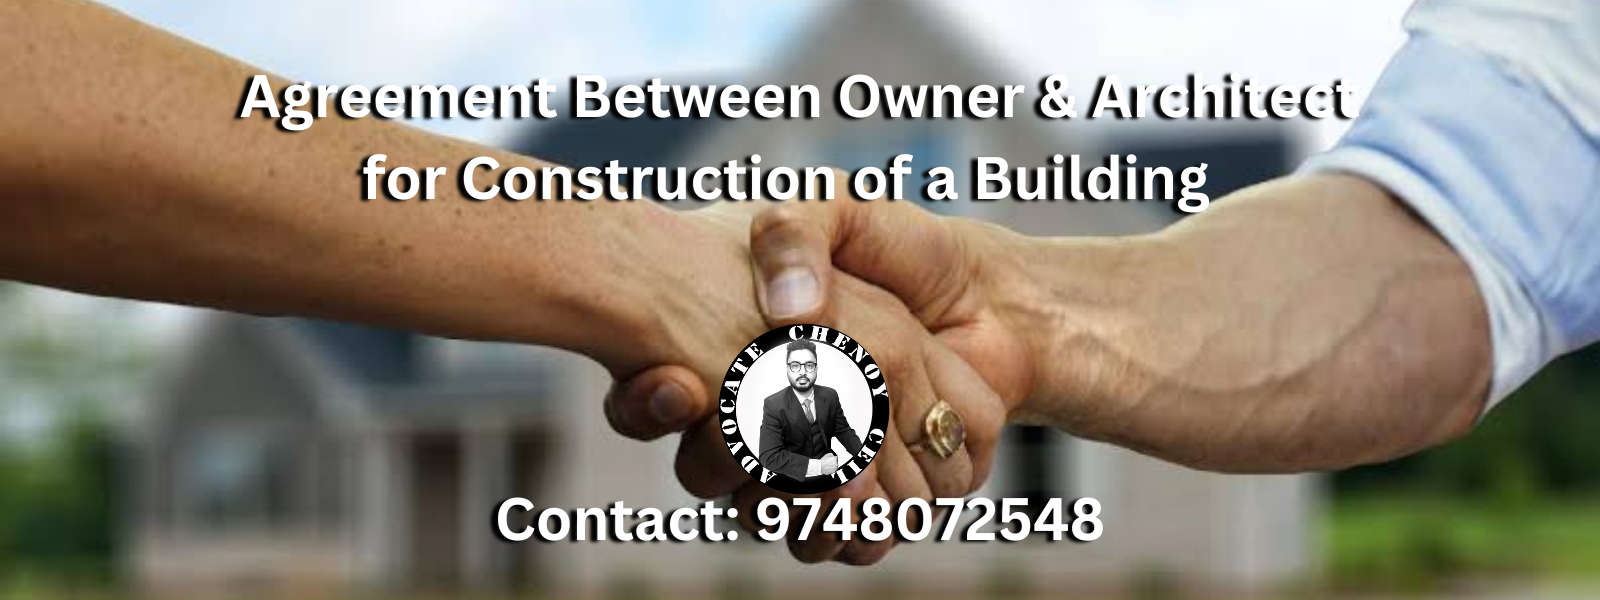 Agreement between Owner & Architect for Construction of a Building